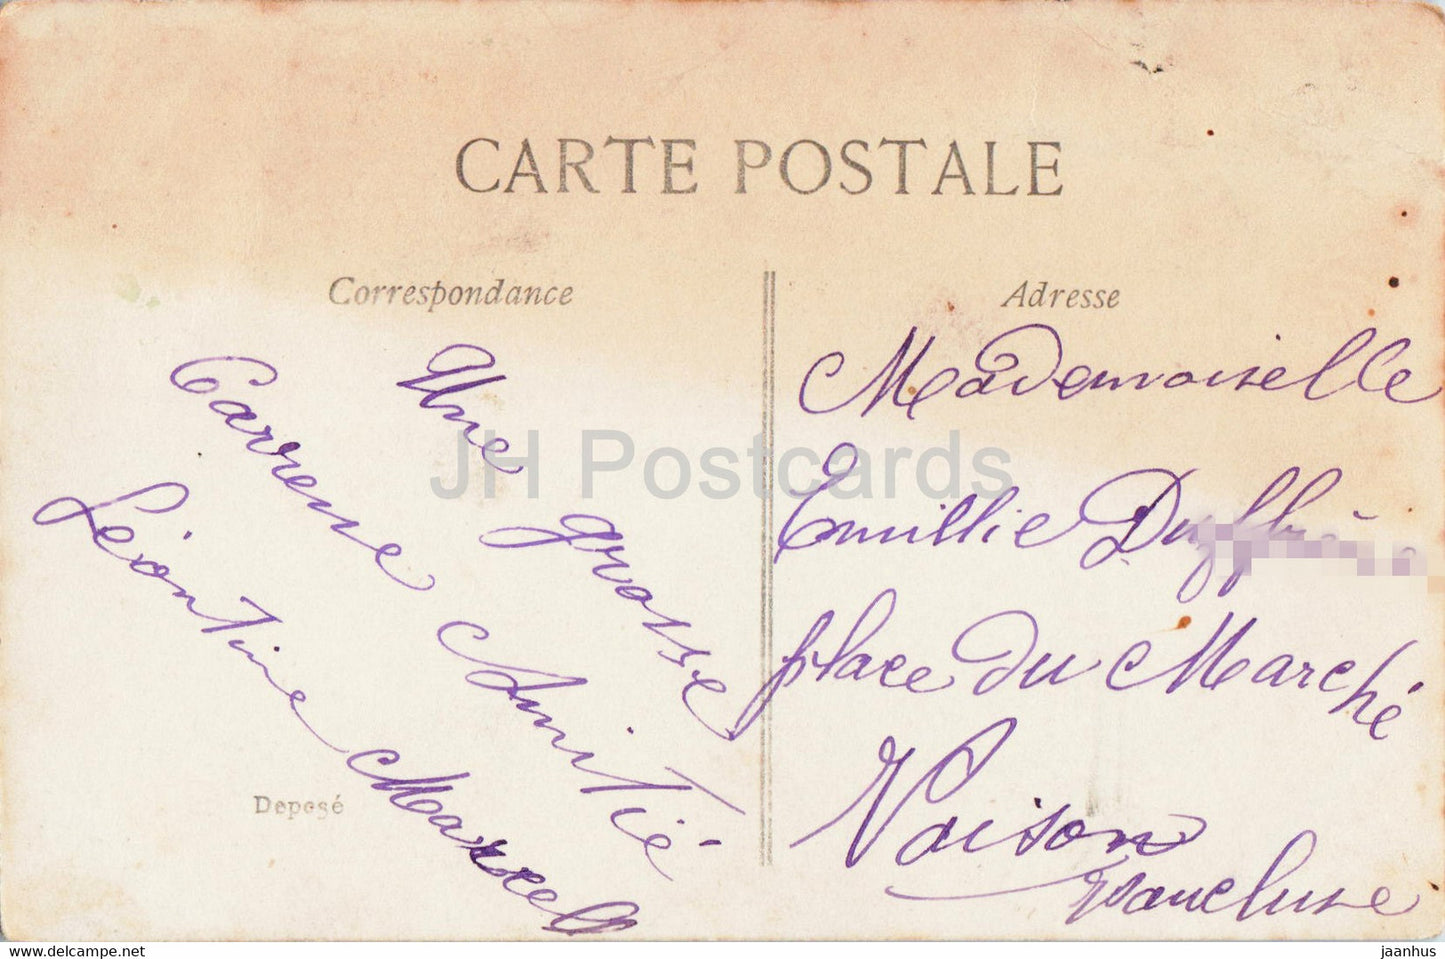 Wilhelm Tell - Guillaume Tell - debout j'honore la puissance - theatre - 4467 - ELD - old postcard - France - used